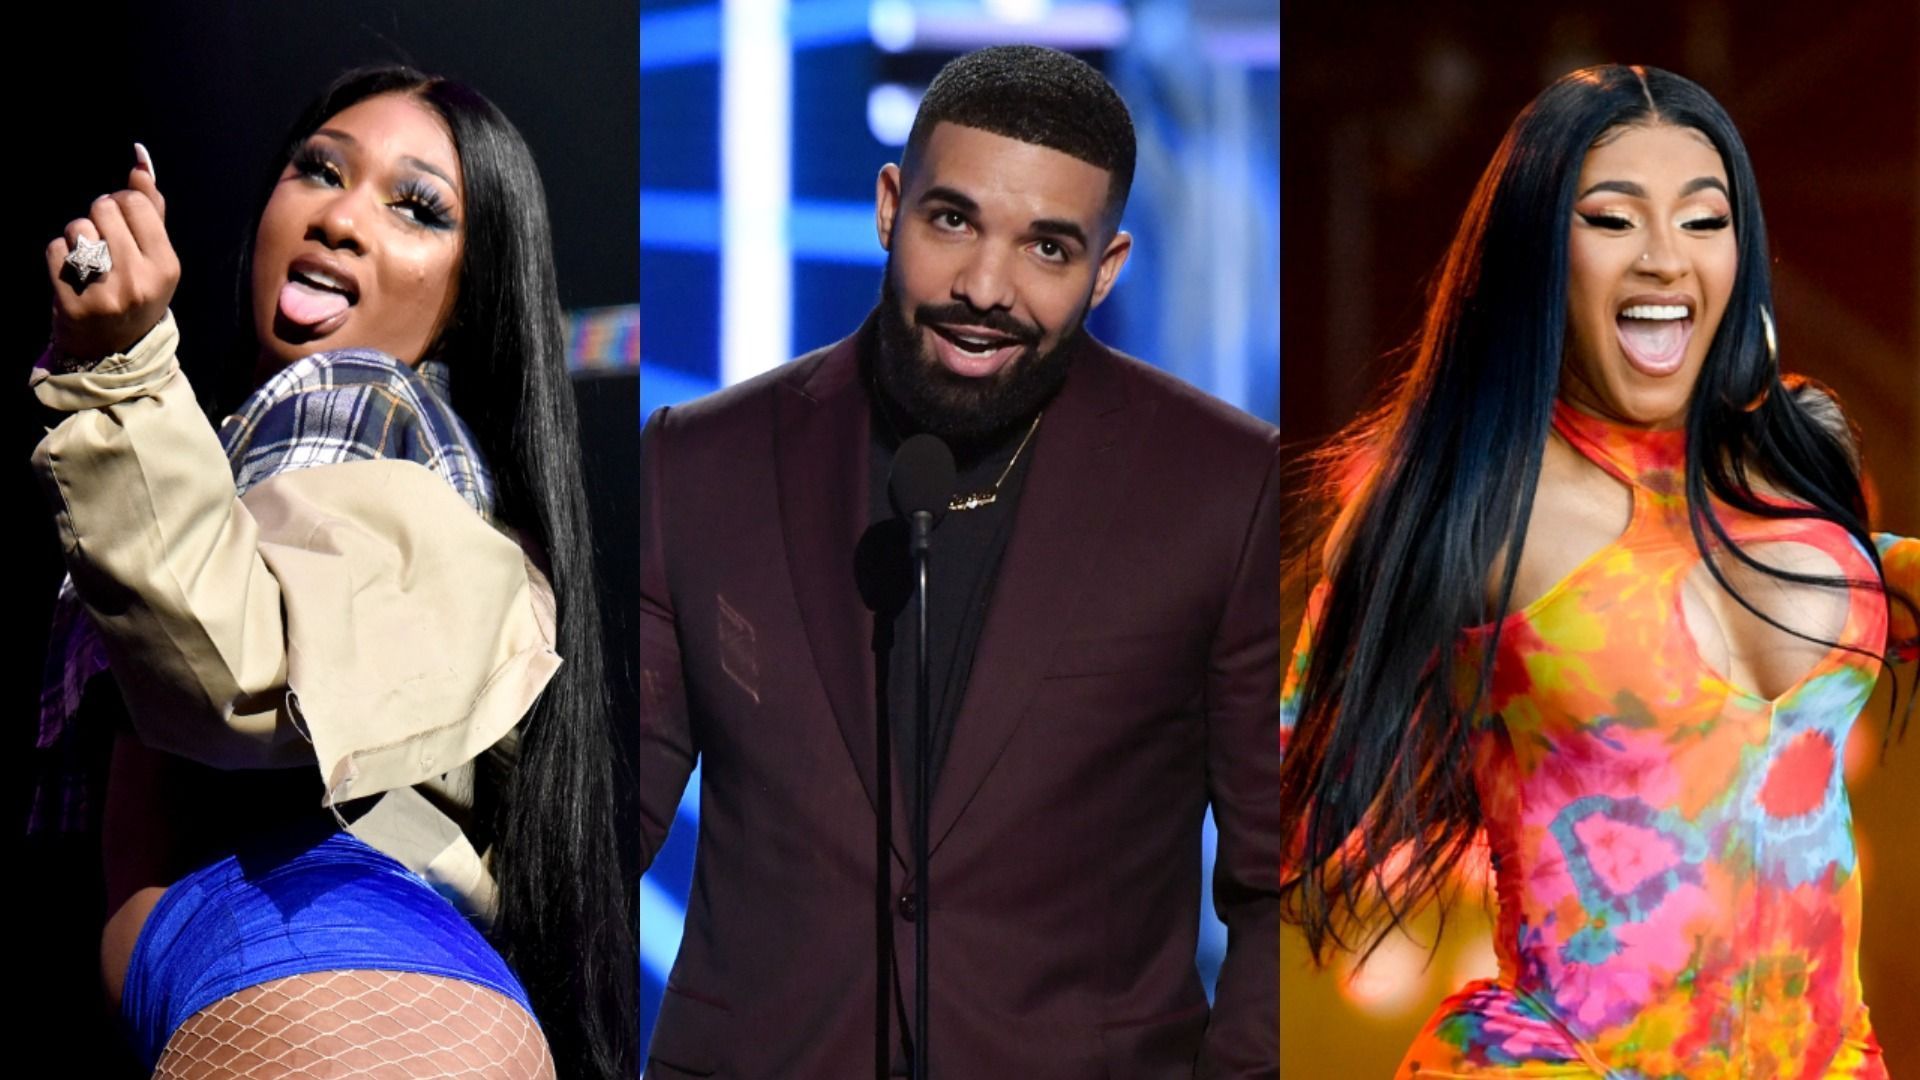 Drake Dropped A Care Package On Toronto With Surprises From Cardi B, Megan Thee Stallion, And More